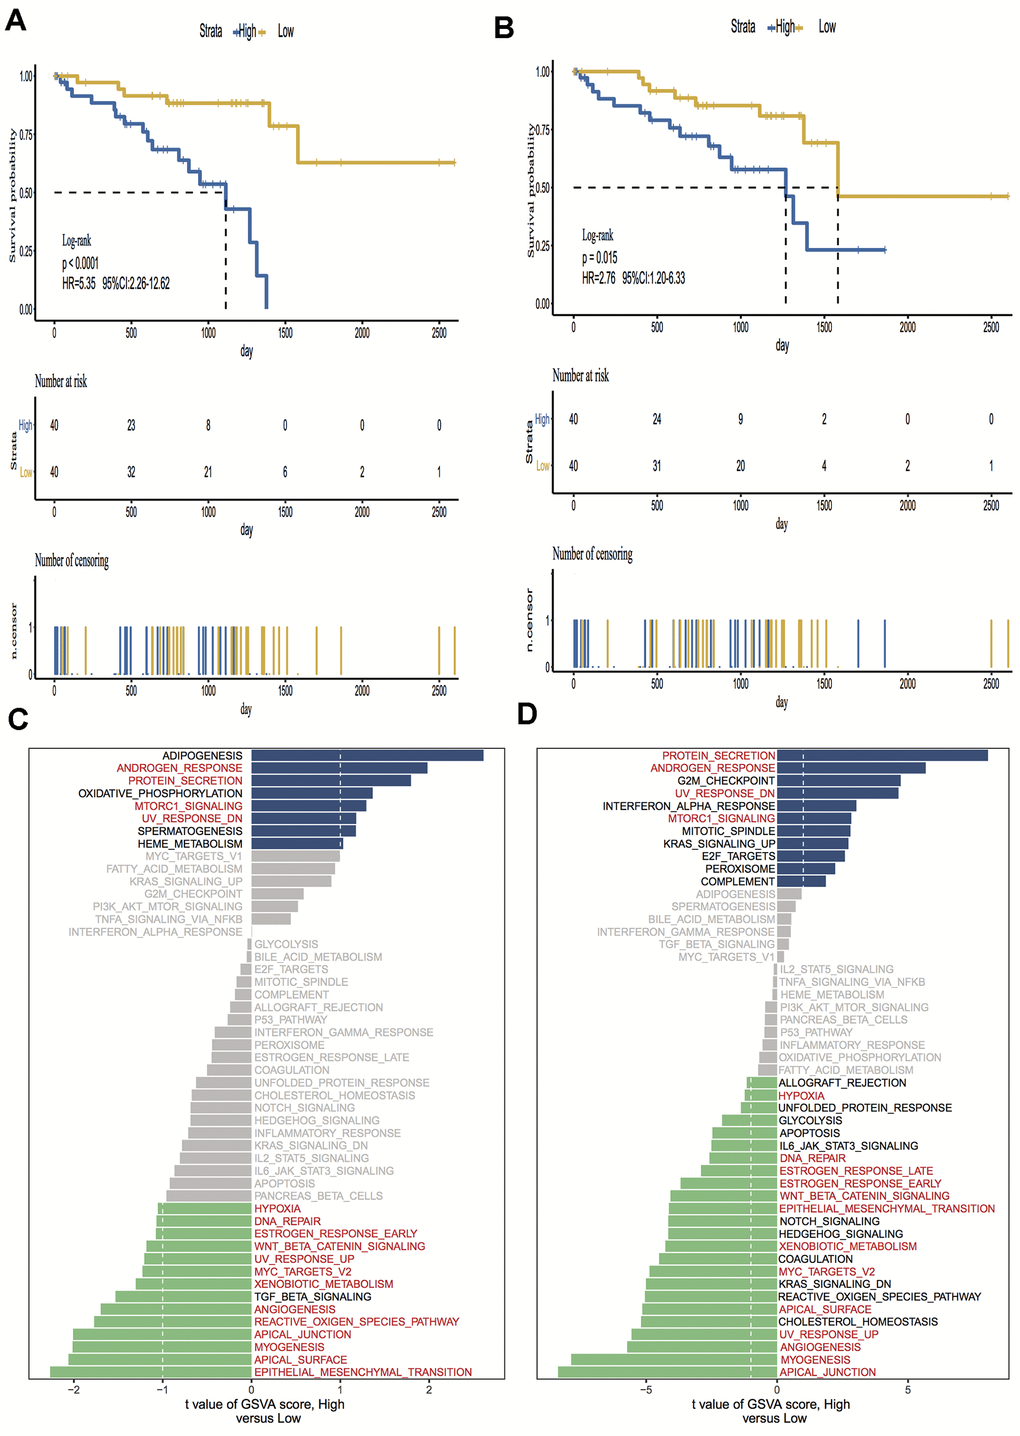 Kaplan-Meier survival analysis and Gene set variation analysis (GSVA) of high vs. low immune scores/stromal scores groups. (A, B) Overall survival among patients with uveal melanoma (UM) based on their immune and stromal scores; (C, D) Differential pathway activities between high and low immune and stromal scores groups, the same pathways are marked in red in the immune and stromal groups. Hazard ratios (HRs) and 95% CIs are for high vs low immune and stromal risk. The log-rank test was used to calculate P values in comparing risk groups.